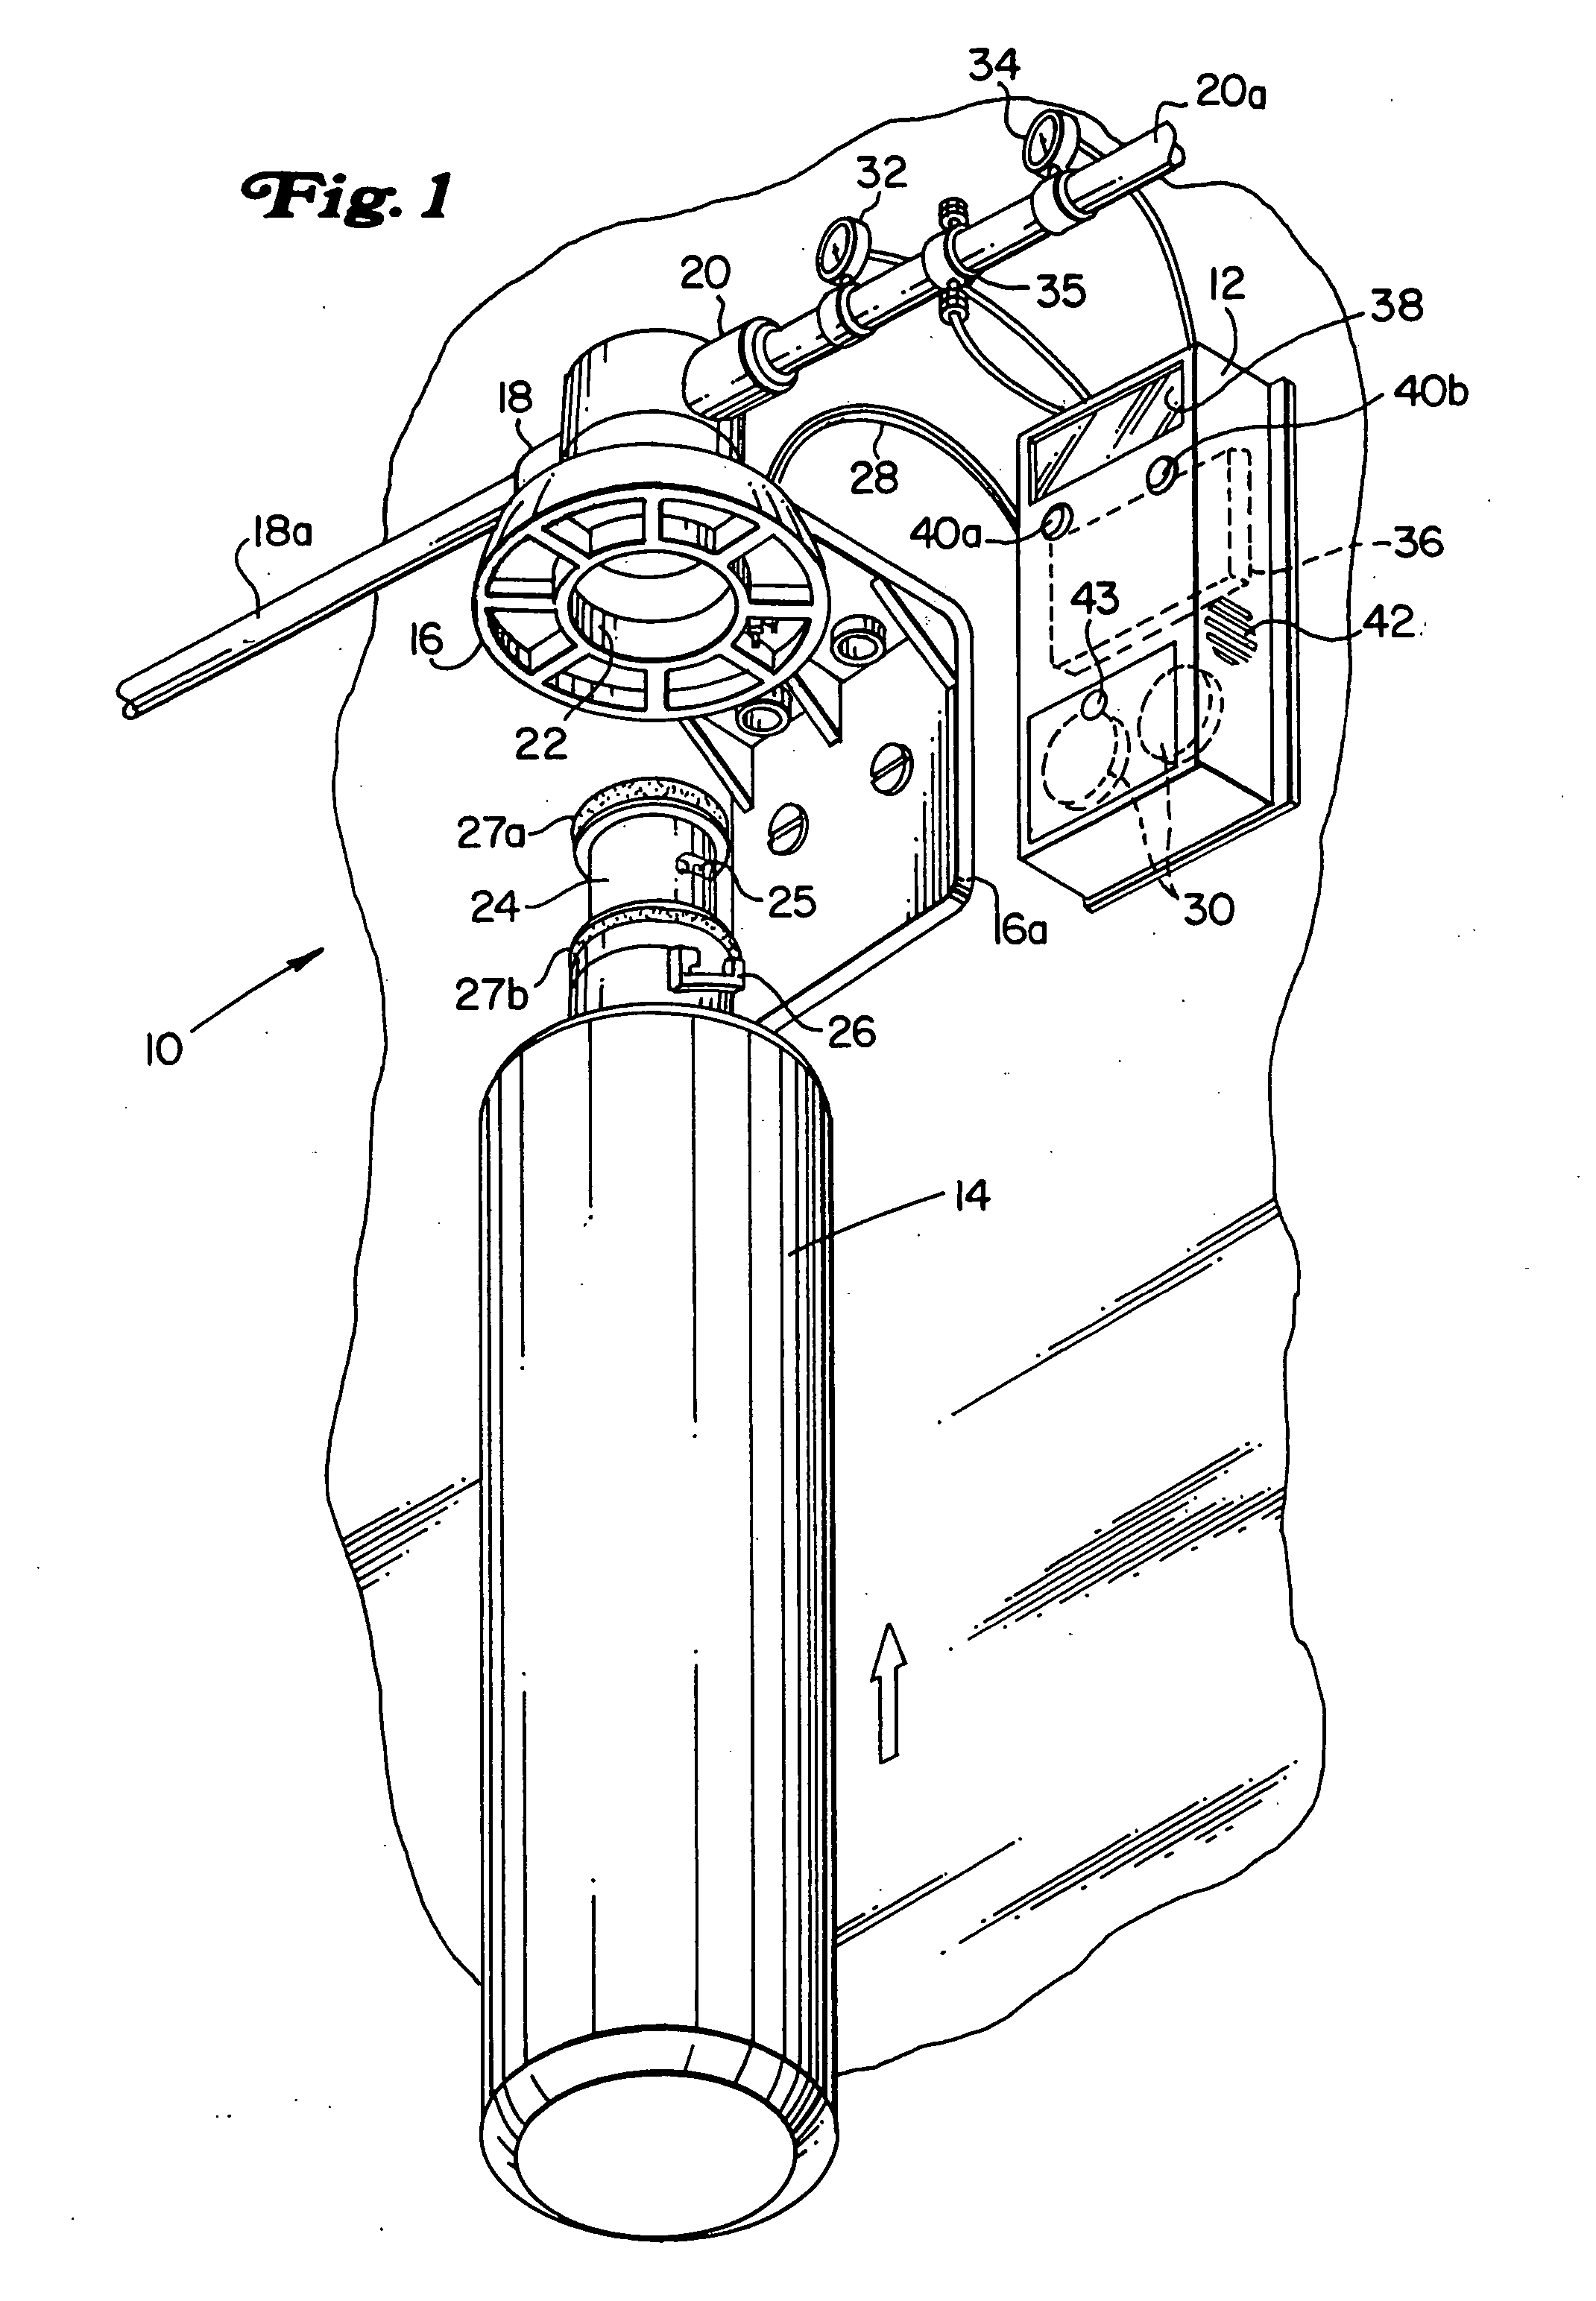 System for monitoring the performance of fluid treatment cartridges